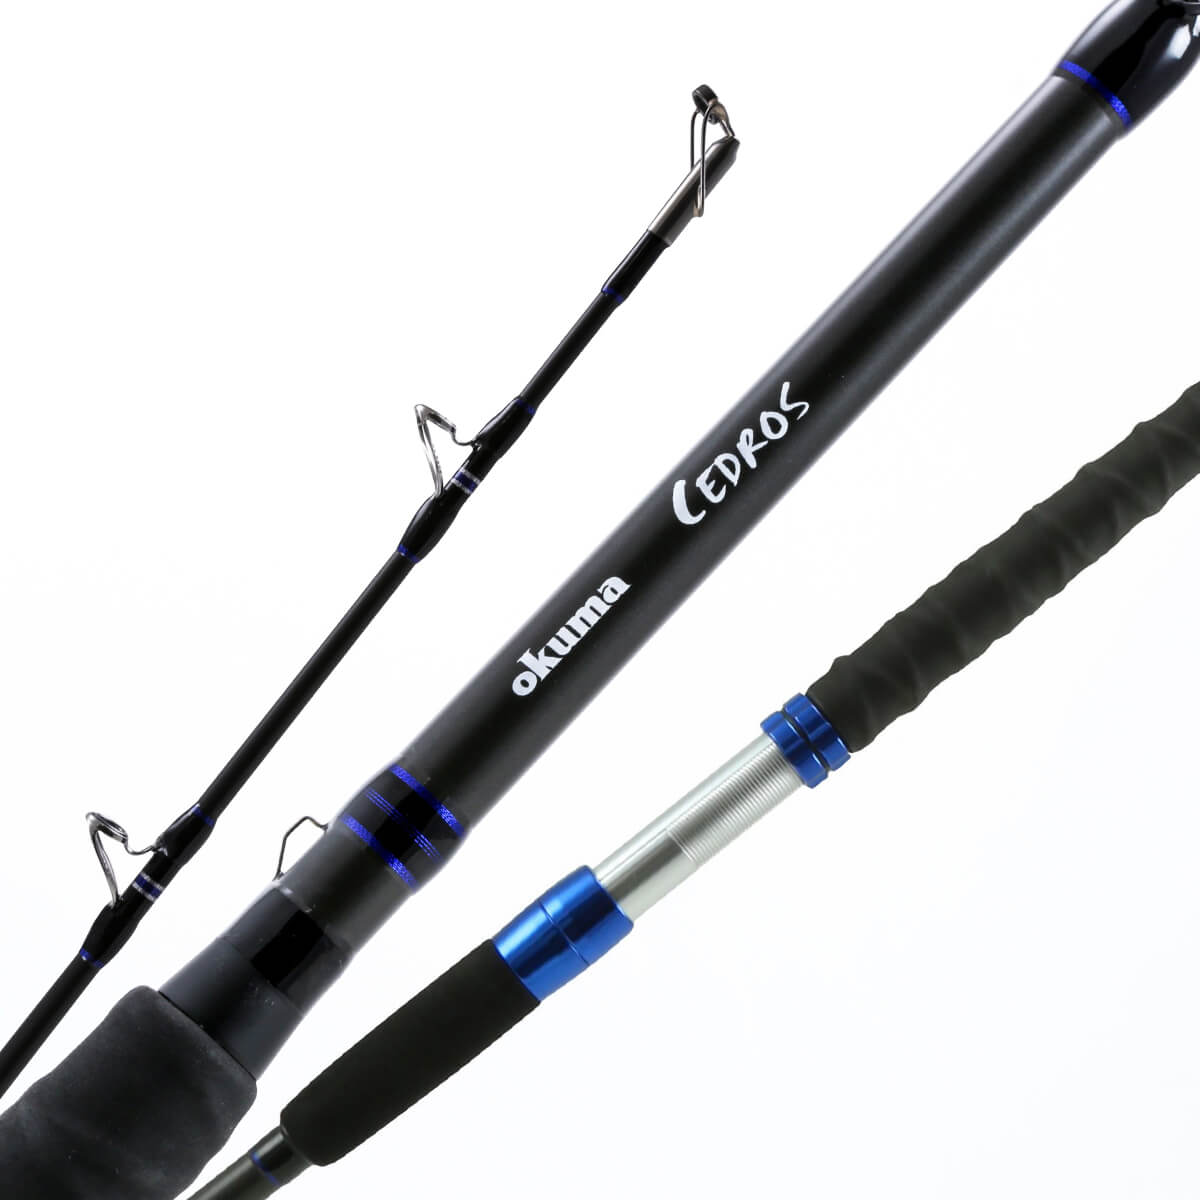 Shop Fishing Rods Online & In-Store - Pacific Net & Twine